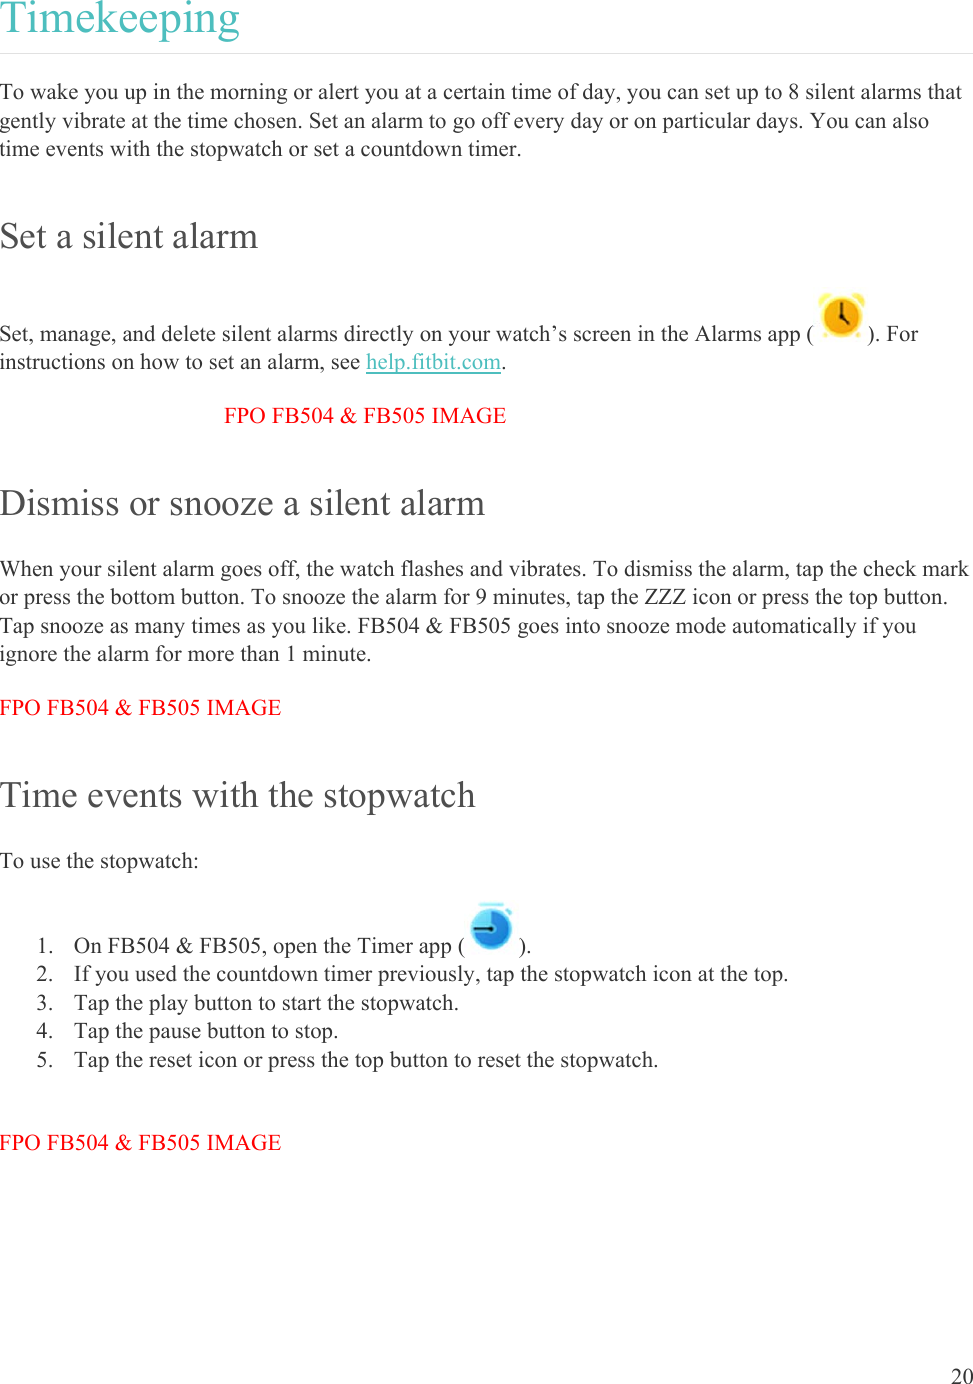    20 Timekeeping To wake you up in the morning or alert you at a certain time of day, you can set up to 8 silent alarms that gently vibrate at the time chosen. Set an alarm to go off every day or on particular days. You can also time events with the stopwatch or set a countdown timer. Set a silent alarm Set, manage, and delete silent alarms directly on your watch’s screen in the Alarms app ( ). For instructions on how to set an alarm, see help.fitbit.com. FPO FB504 &amp; FB505 IMAGE Dismiss or snooze a silent alarm When your silent alarm goes off, the watch flashes and vibrates. To dismiss the alarm, tap the check mark or press the bottom button. To snooze the alarm for 9 minutes, tap the ZZZ icon or press the top button. Tap snooze as many times as you like. FB504 &amp; FB505 goes into snooze mode automatically if you ignore the alarm for more than 1 minute. FPO FB504 &amp; FB505 IMAGE Time events with the stopwatch To use the stopwatch: 1. On FB504 &amp; FB505, open the Timer app ( ). 2. If you used the countdown timer previously, tap the stopwatch icon at the top. 3. Tap the play button to start the stopwatch.  4. Tap the pause button to stop.  5. Tap the reset icon or press the top button to reset the stopwatch.  FPO FB504 &amp; FB505 IMAGE 